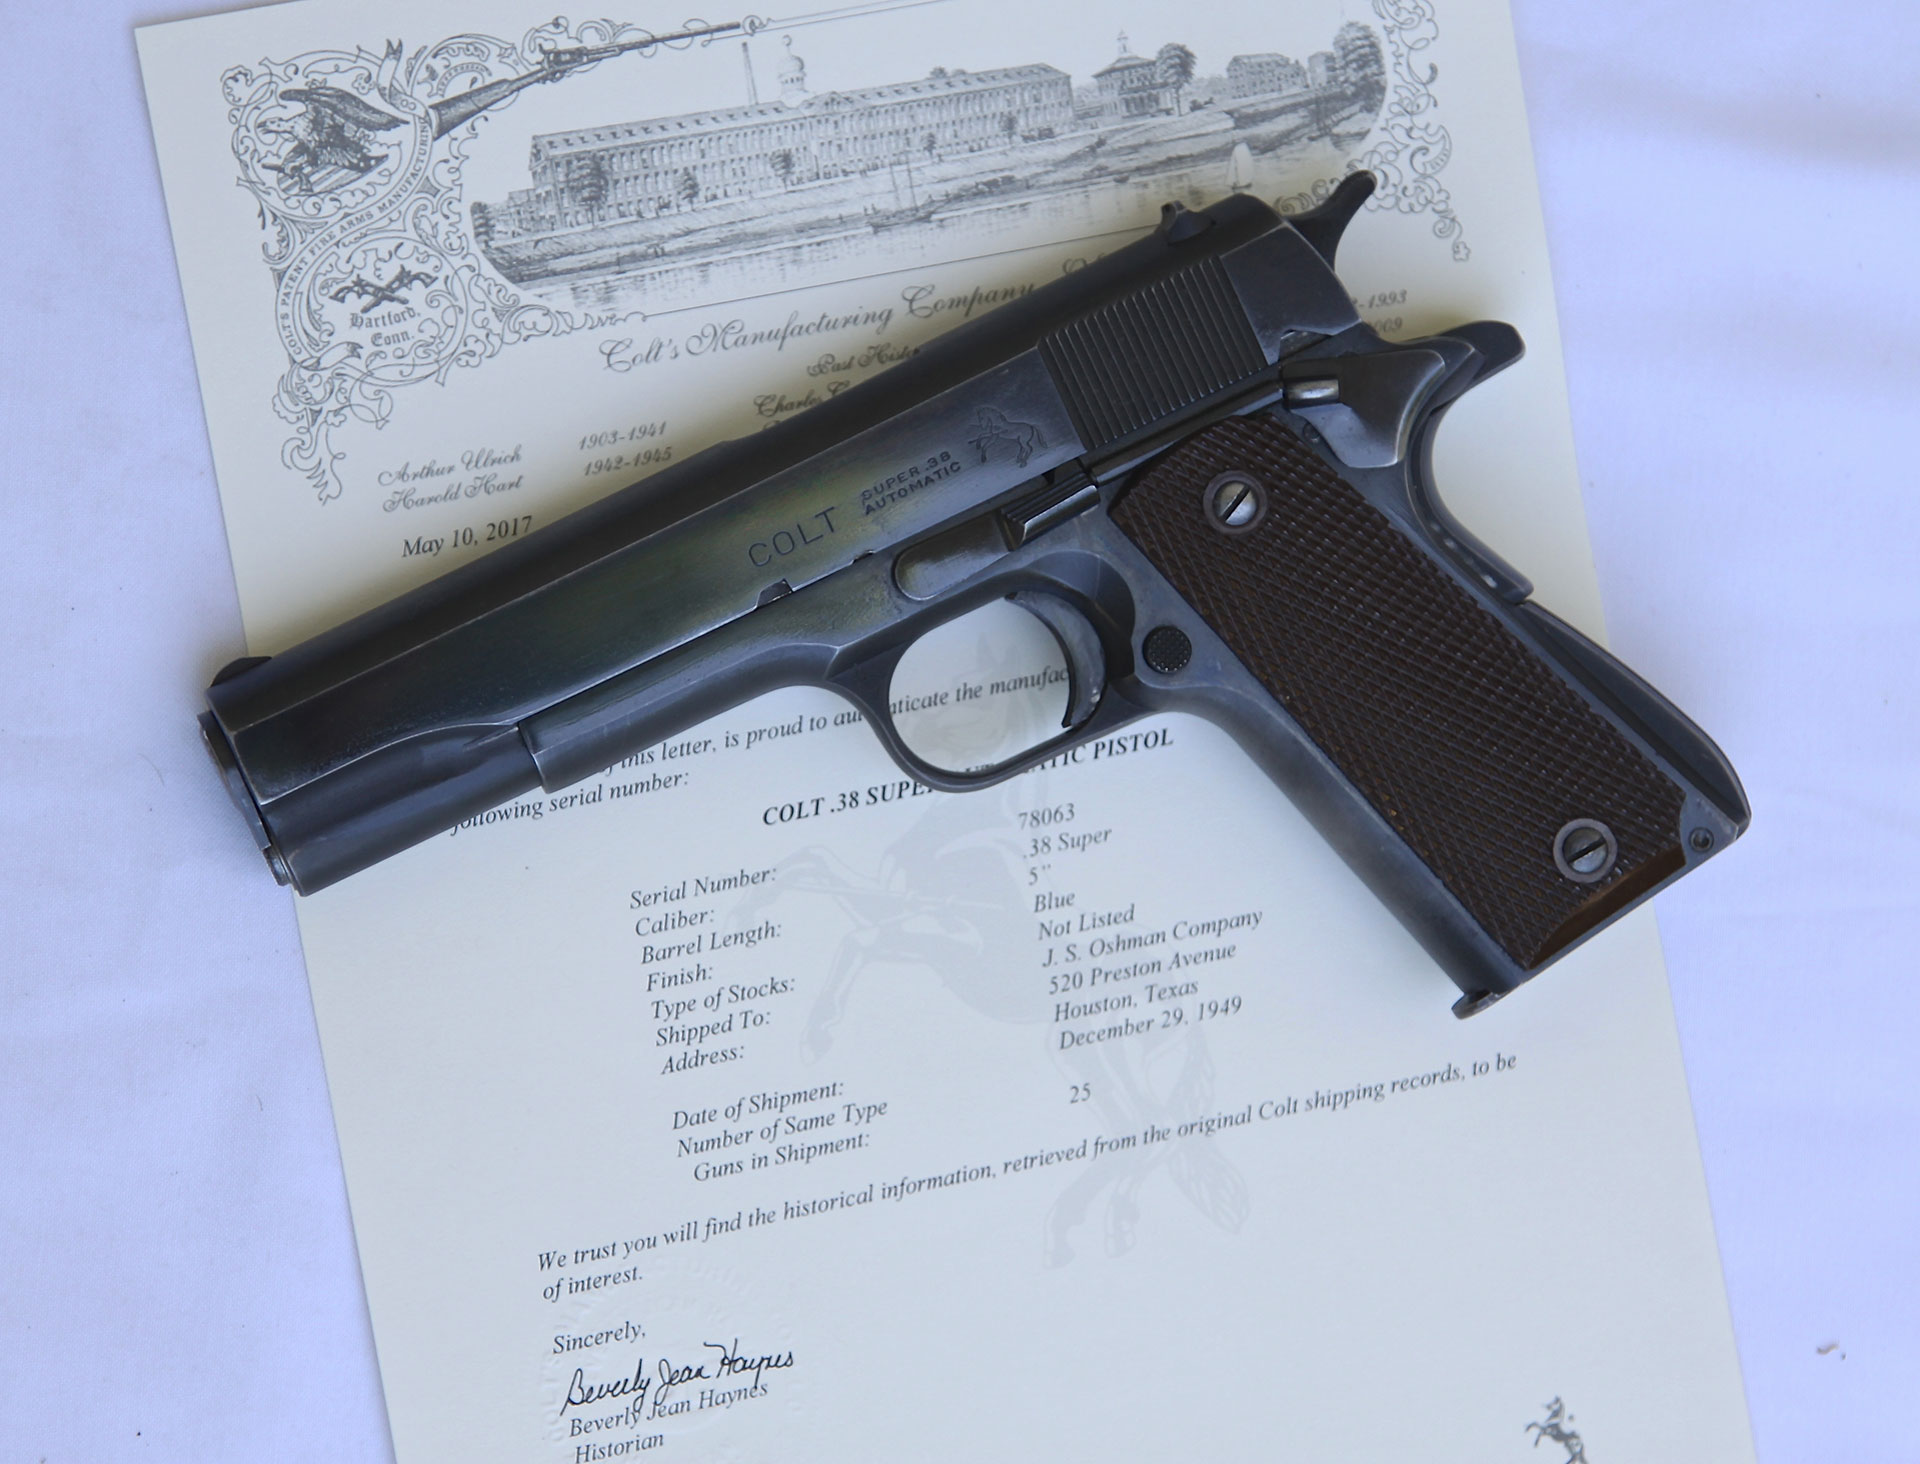 Fat barreled Colt .38 Super semi-automatic pistol, blued metal and dark wood grips, on top of a white background and a Colt factory letter.